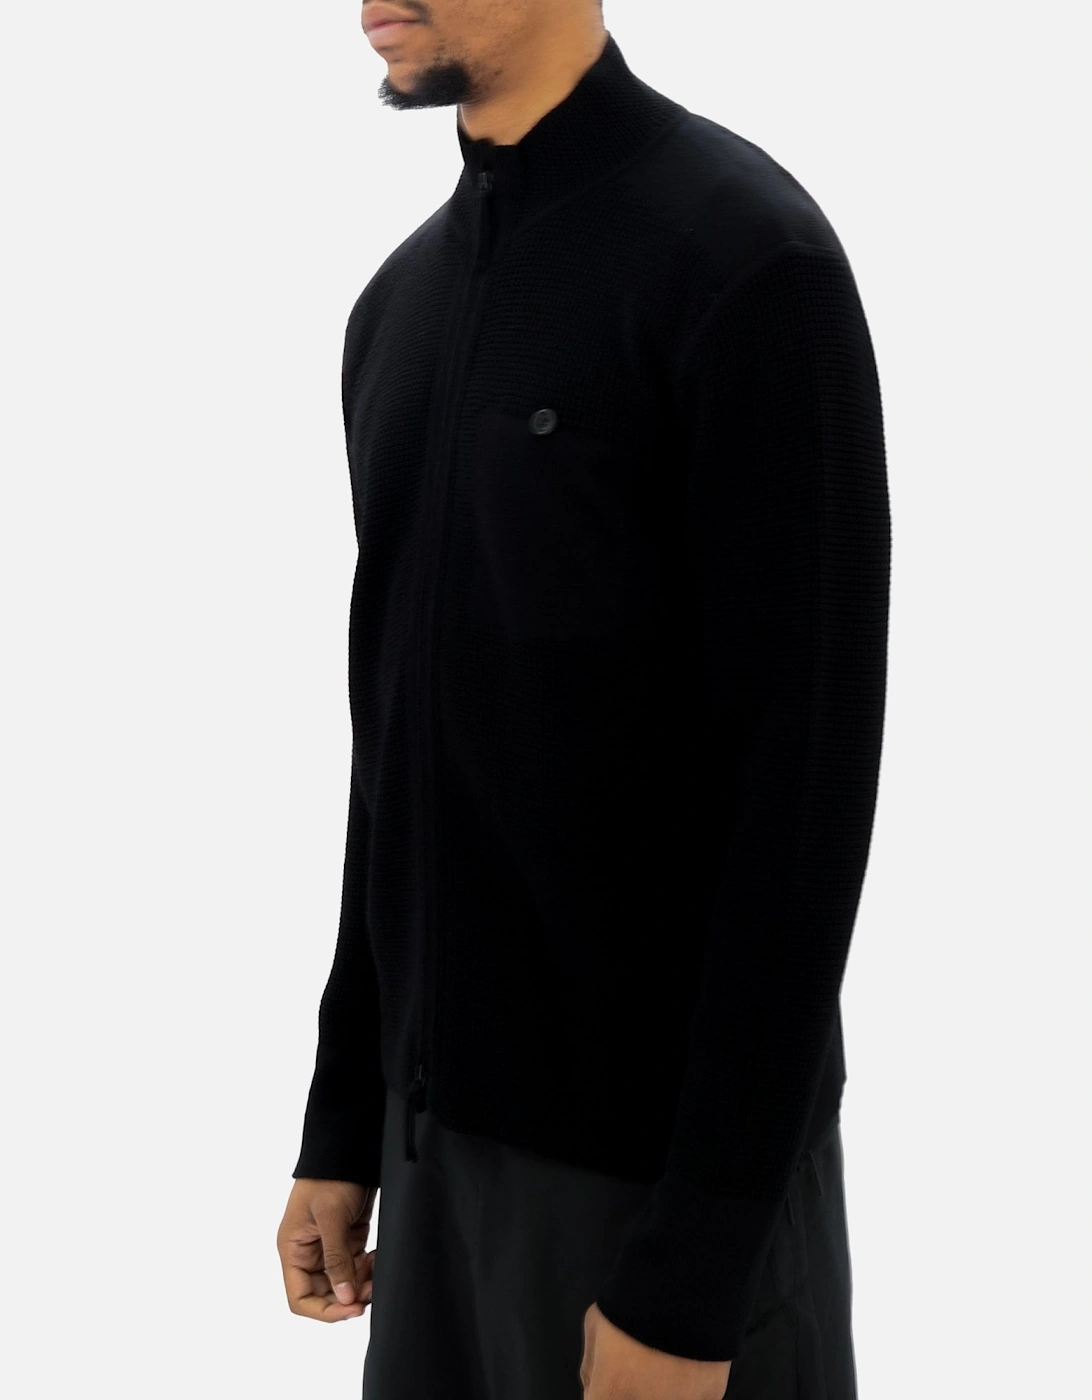 Textured Zip Knitted Black Cardigan